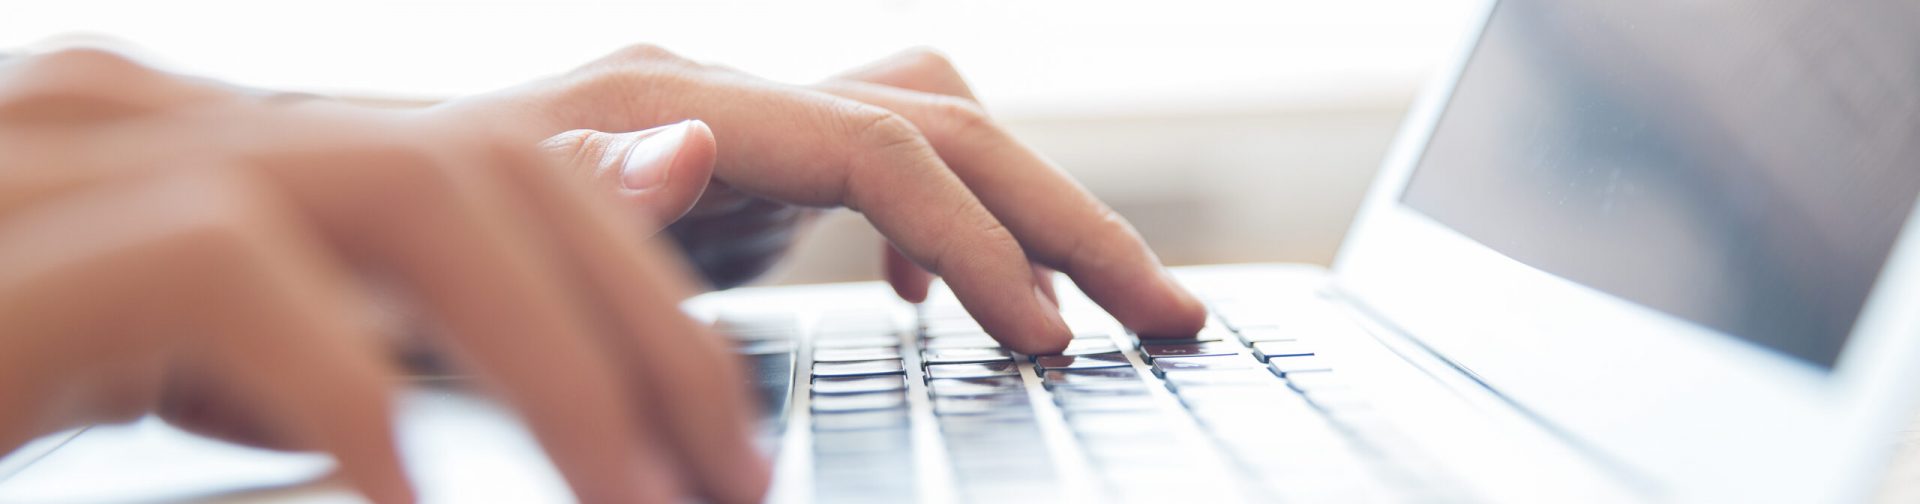 Close-up of male hands typing on laptop keyboard indoors. Businessman working in office or student browsing information